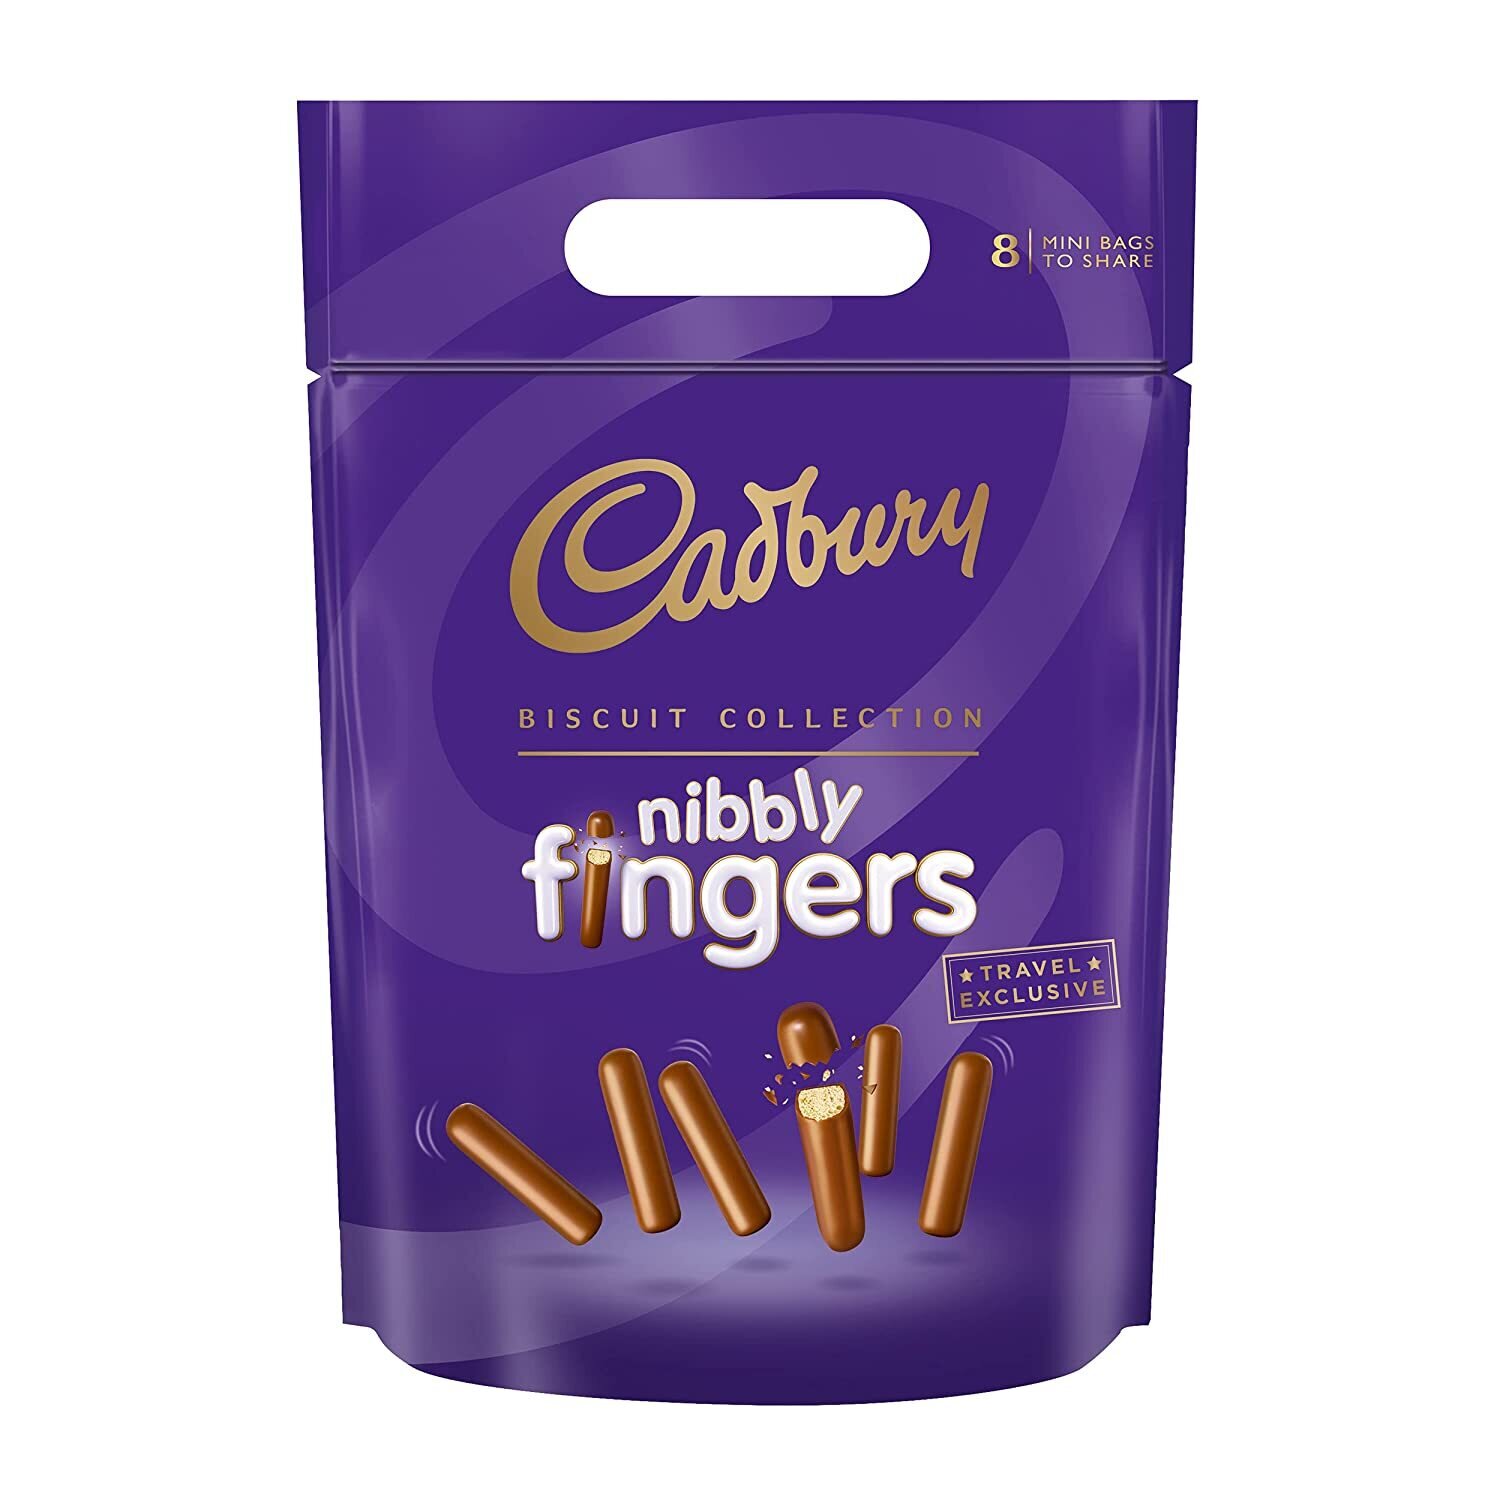 Cadbury Nibbly Fingers Biscuit Collection ( 8 Mini Bags) 320G | Melt-Proof Packing | Same-Day Dispatch | Free Delivery